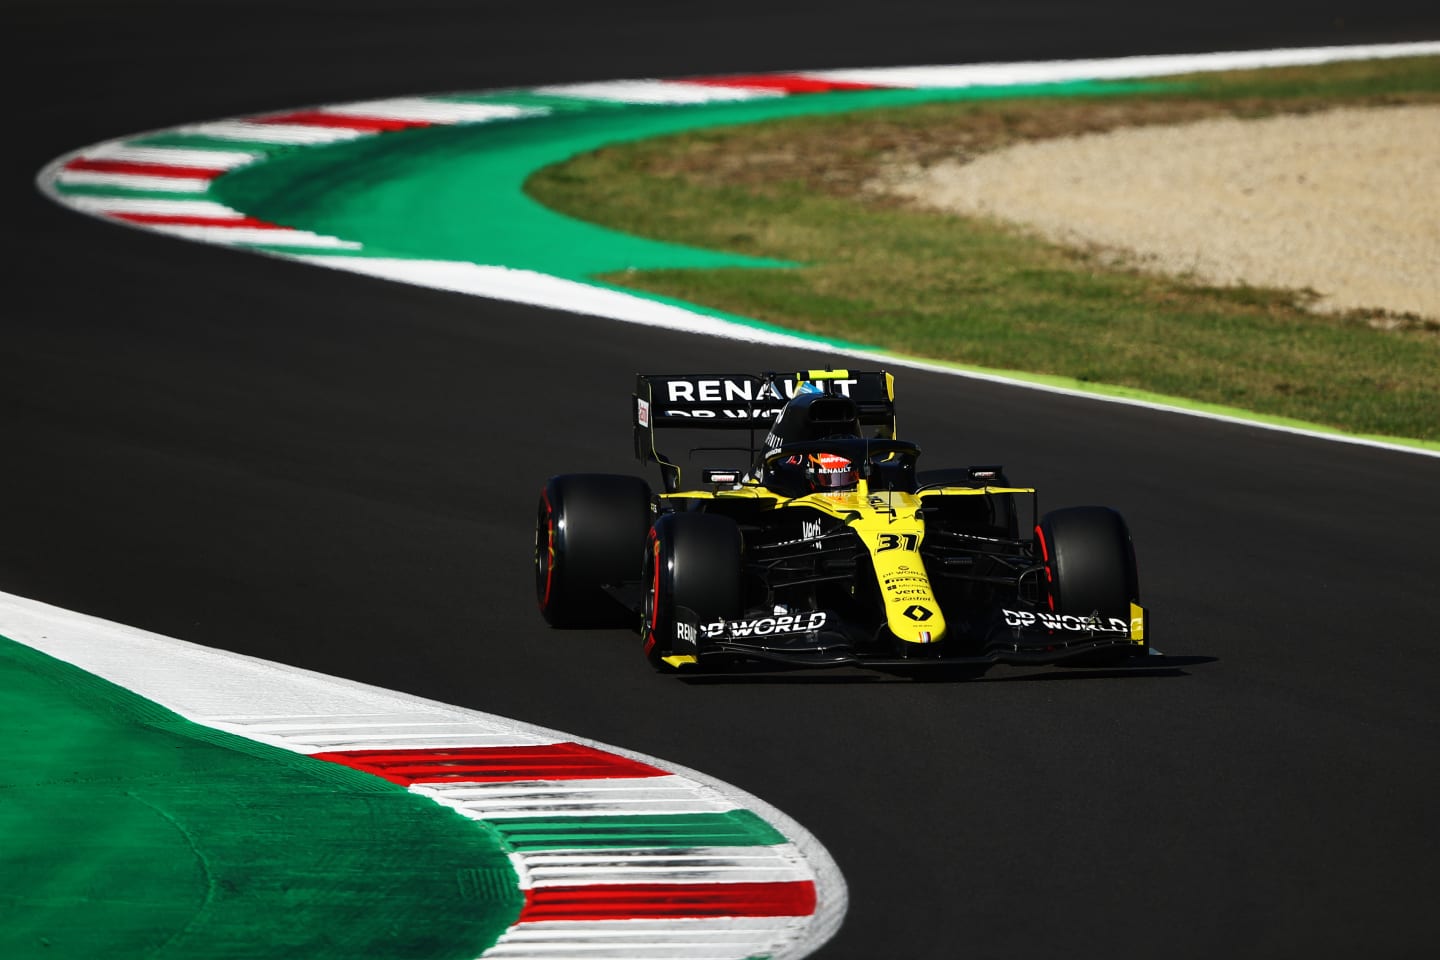 SCARPERIA, ITALY - SEPTEMBER 12: Esteban Ocon of France driving the (31) Renault Sport Formula One Team RS20 on track during qualifying for the F1 Grand Prix of Tuscany at Mugello Circuit on September 12, 2020 in Scarperia, Italy. (Photo by Bryn Lennon/Getty Images)